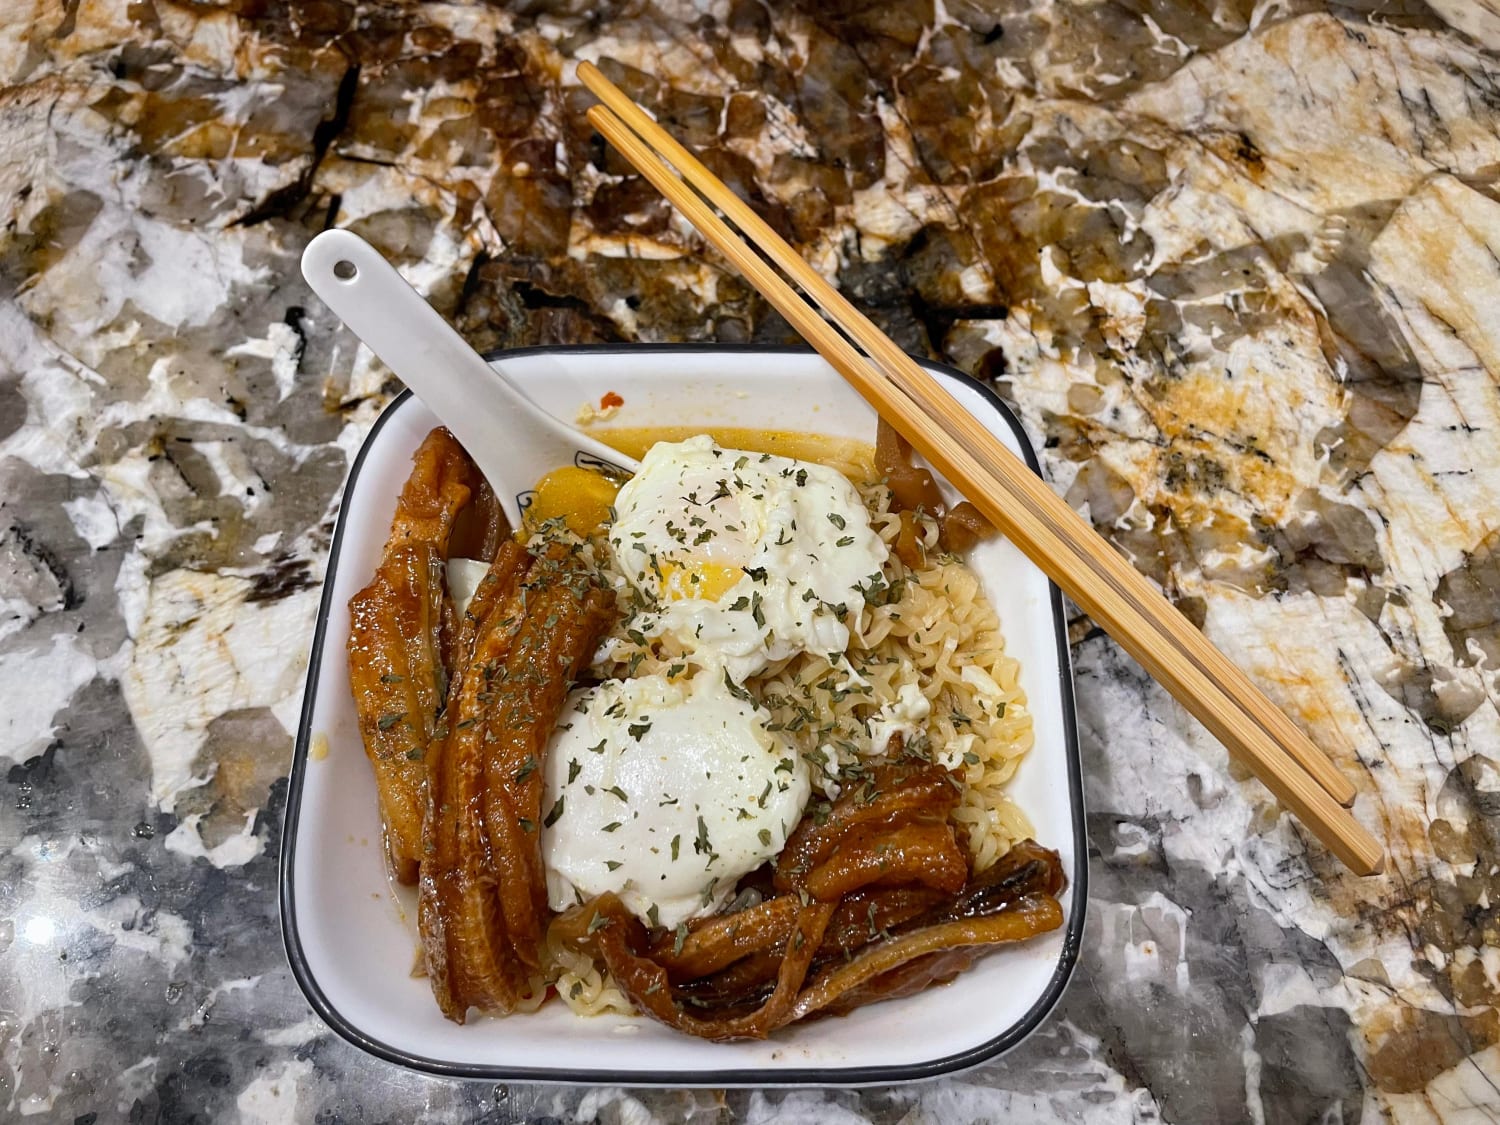 I made budget ramen. Instant store ramen, two poached eggs, chili radishes from a jar, and canned eel in bean sauce. Splash of soy sauce and sesame oil, sprinkle of parsley.